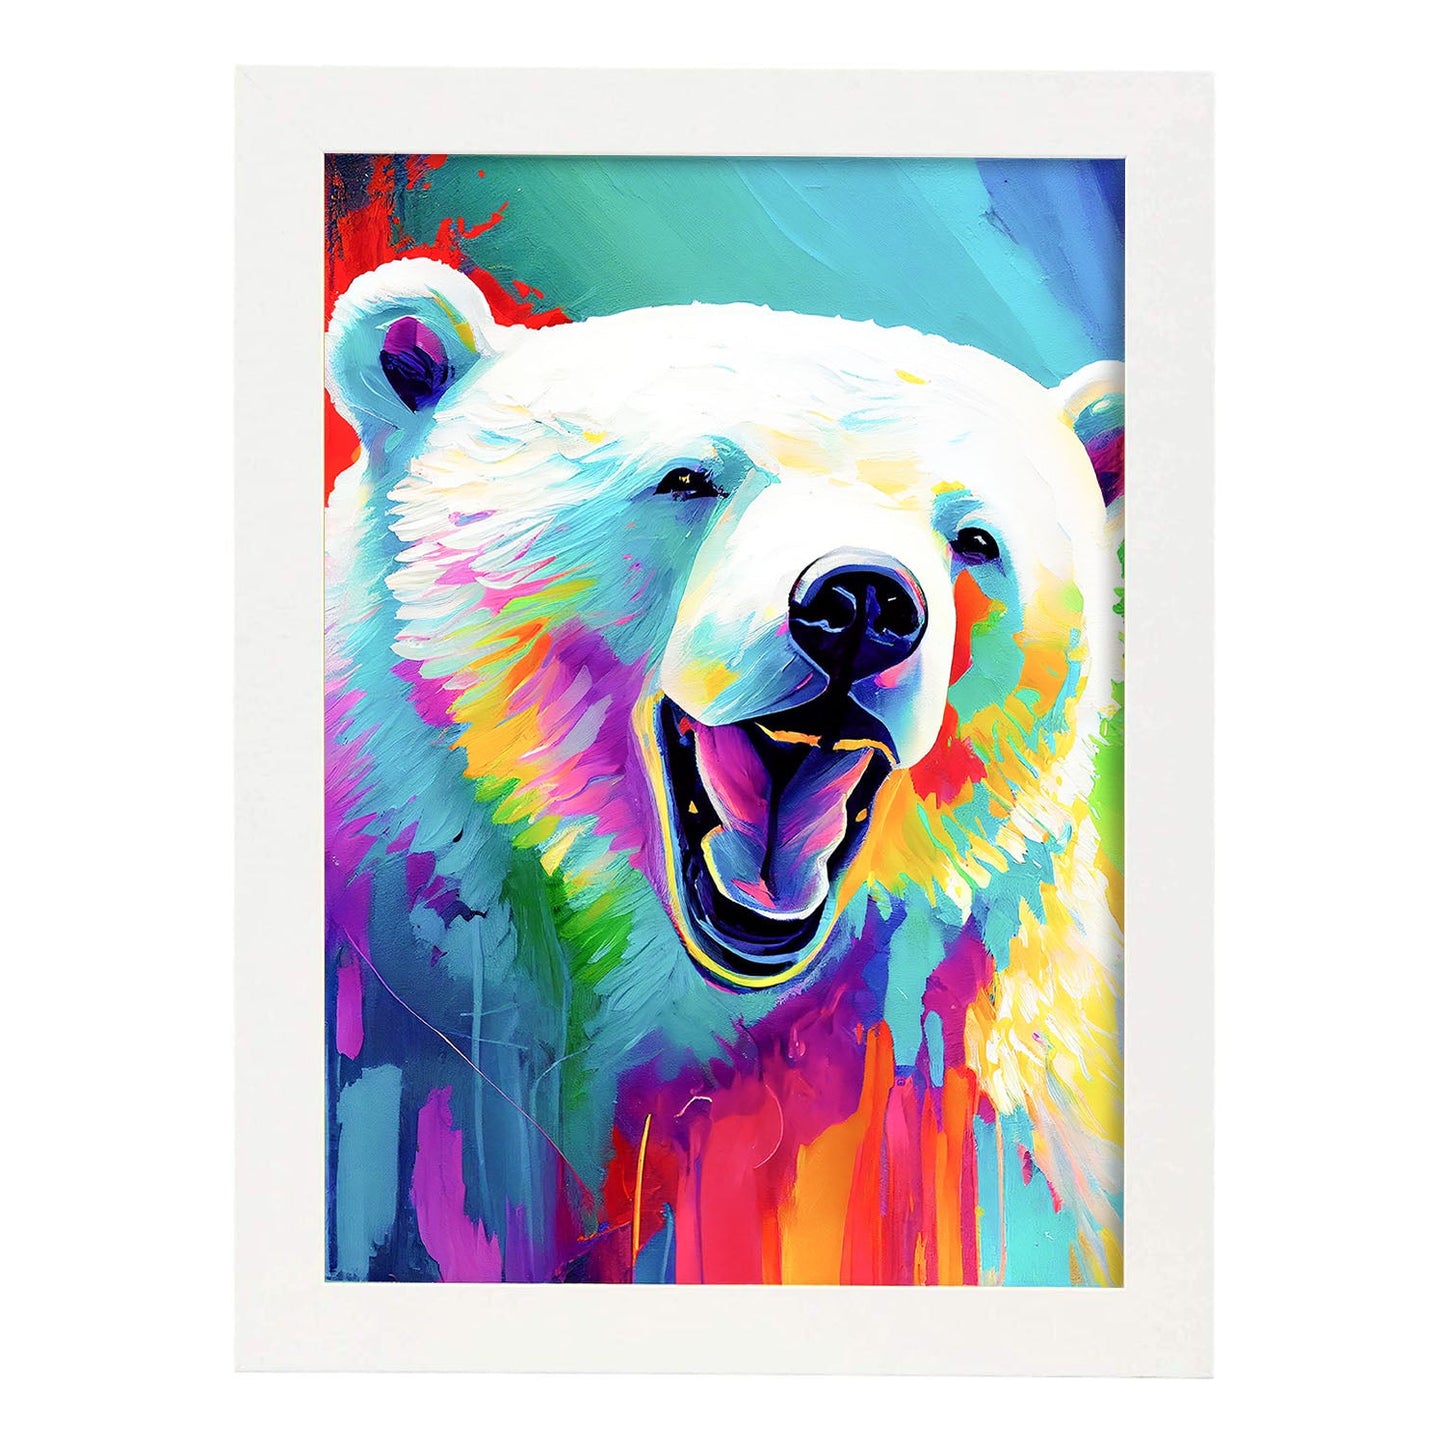 Nacnic Abstract smiling Polar Bear in Lisa Fran Style_2. Aesthetic Wall Art Prints for Bedroom or Living Room Design.